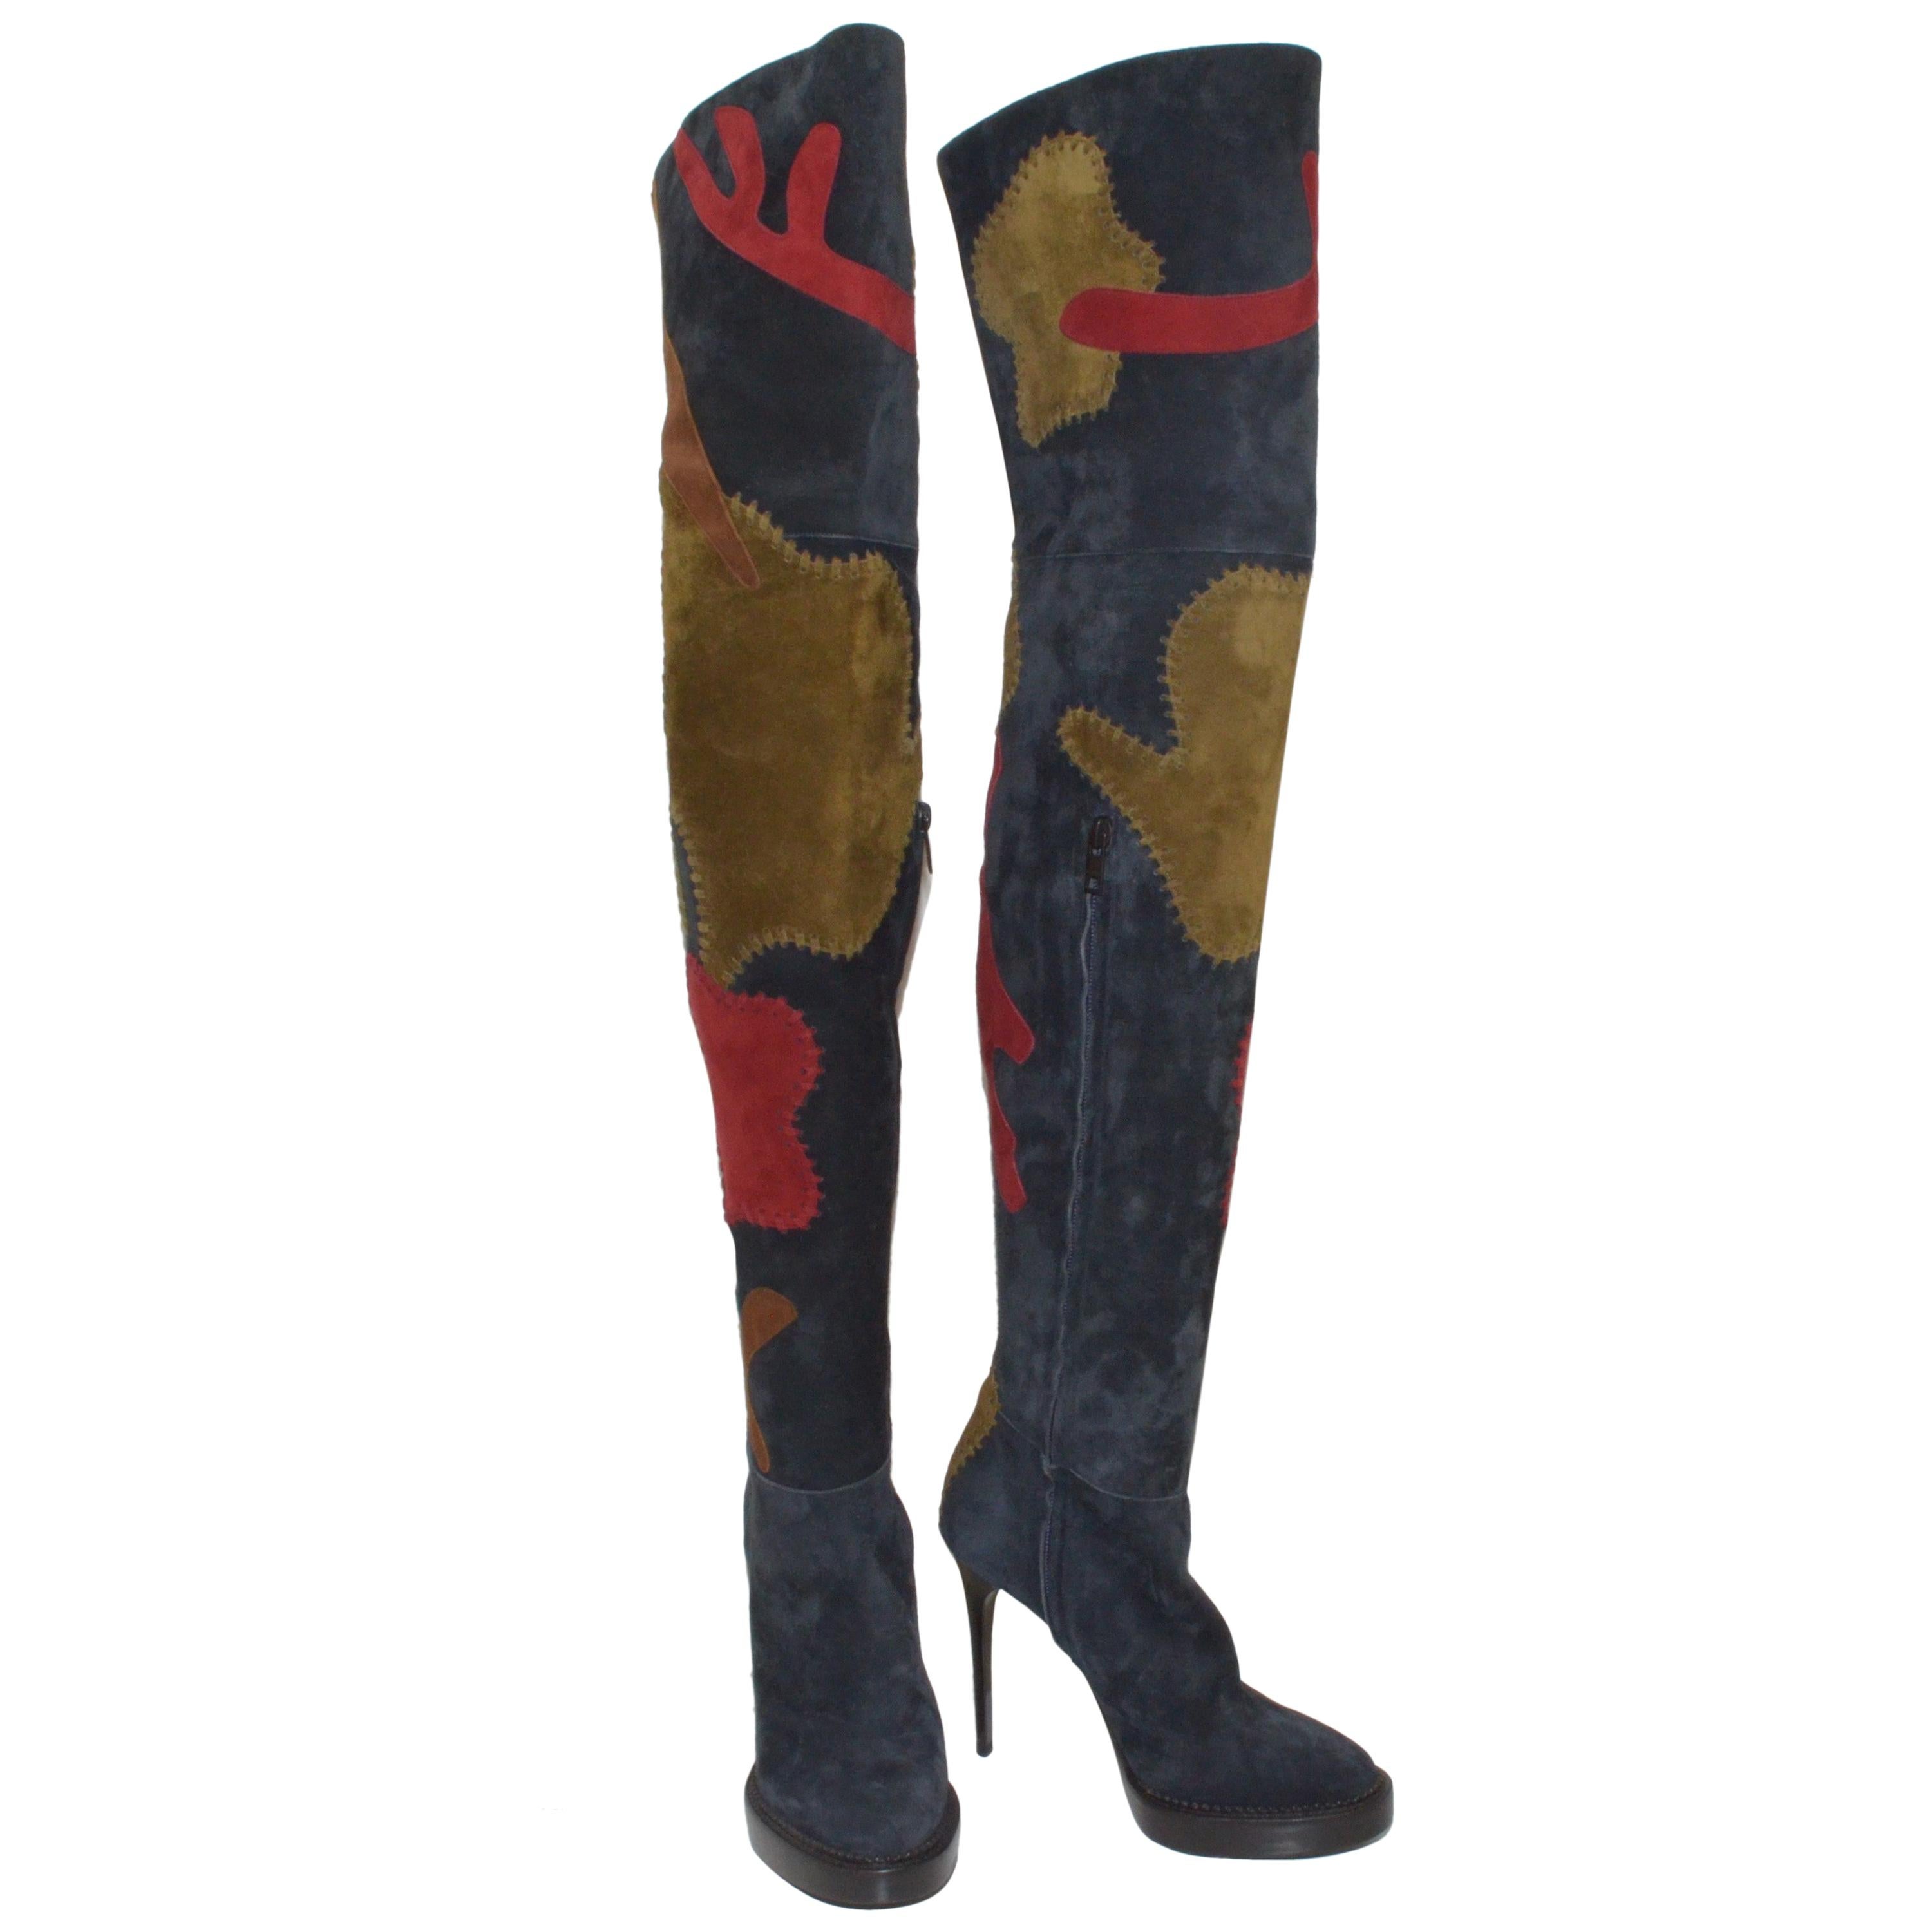 Burberry Suede Patchwork Thigh-High Boots, 37